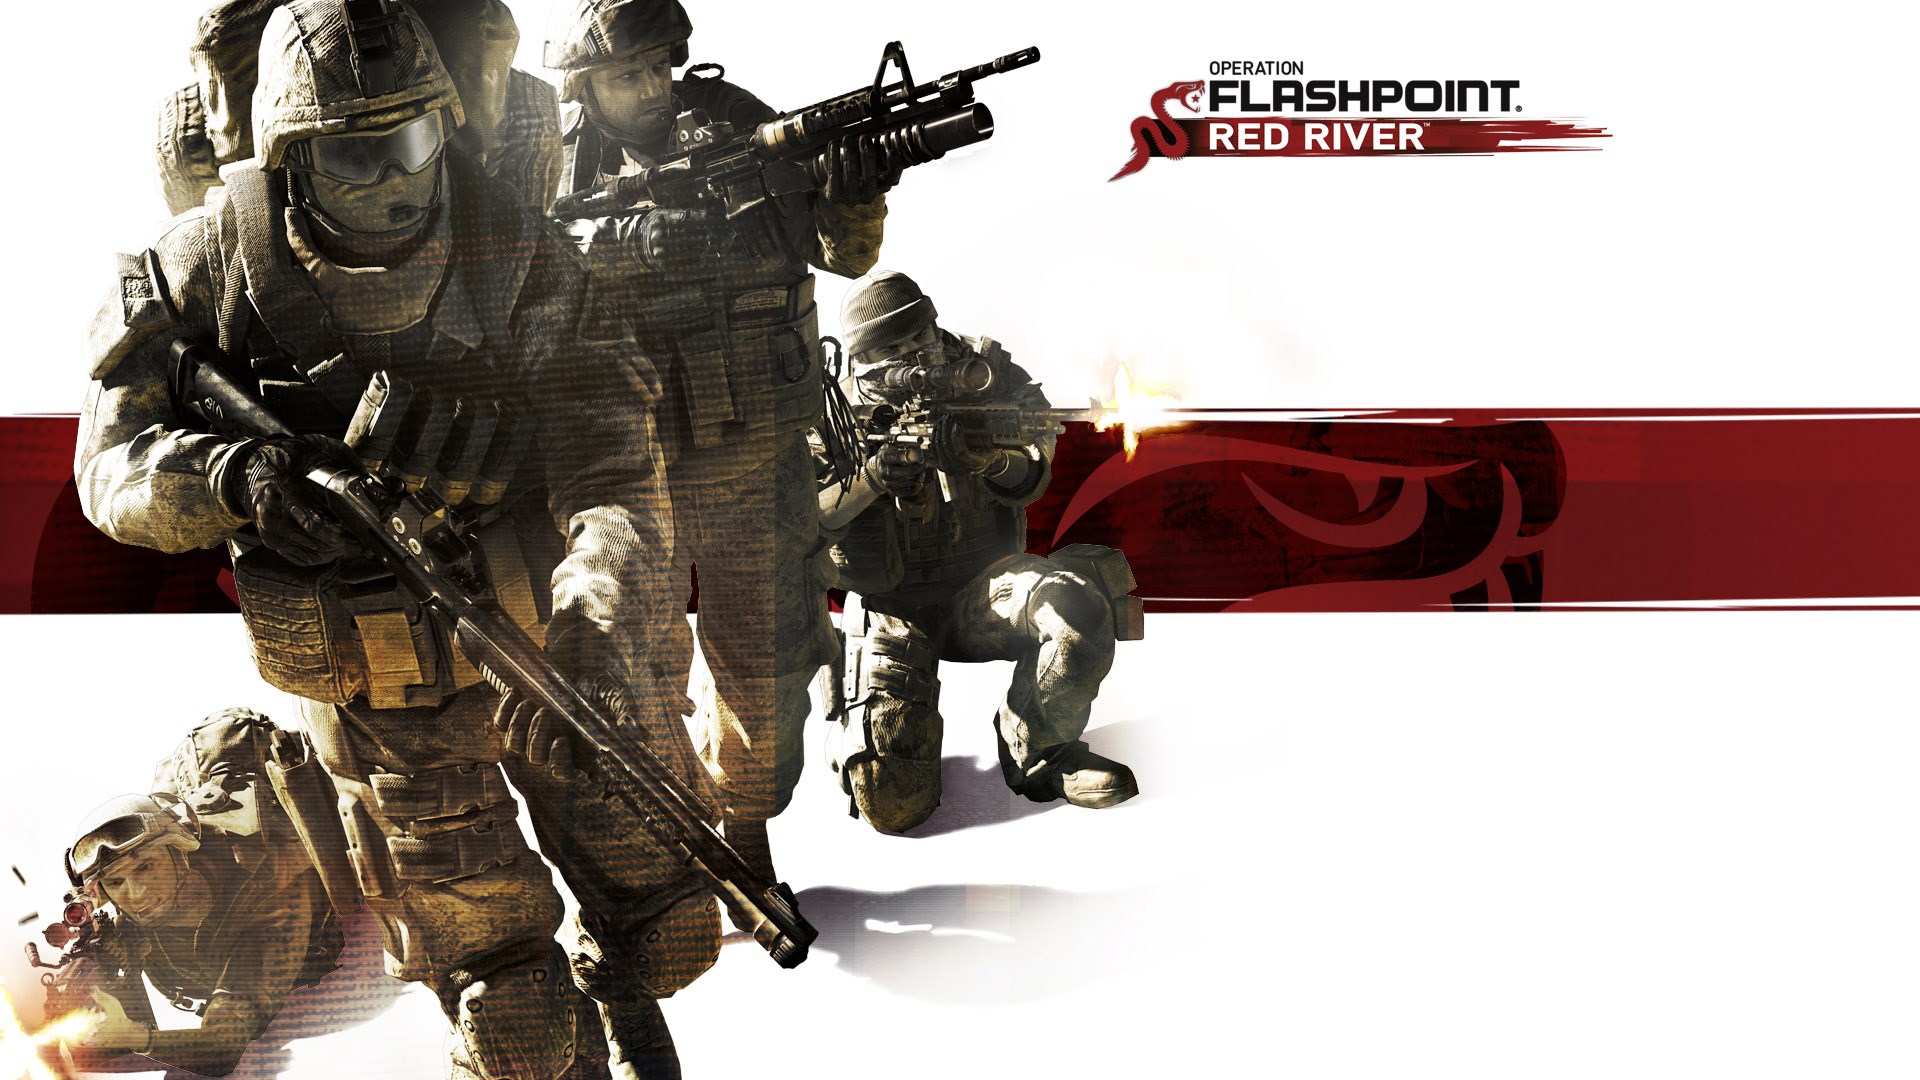 operation flashpoint free download